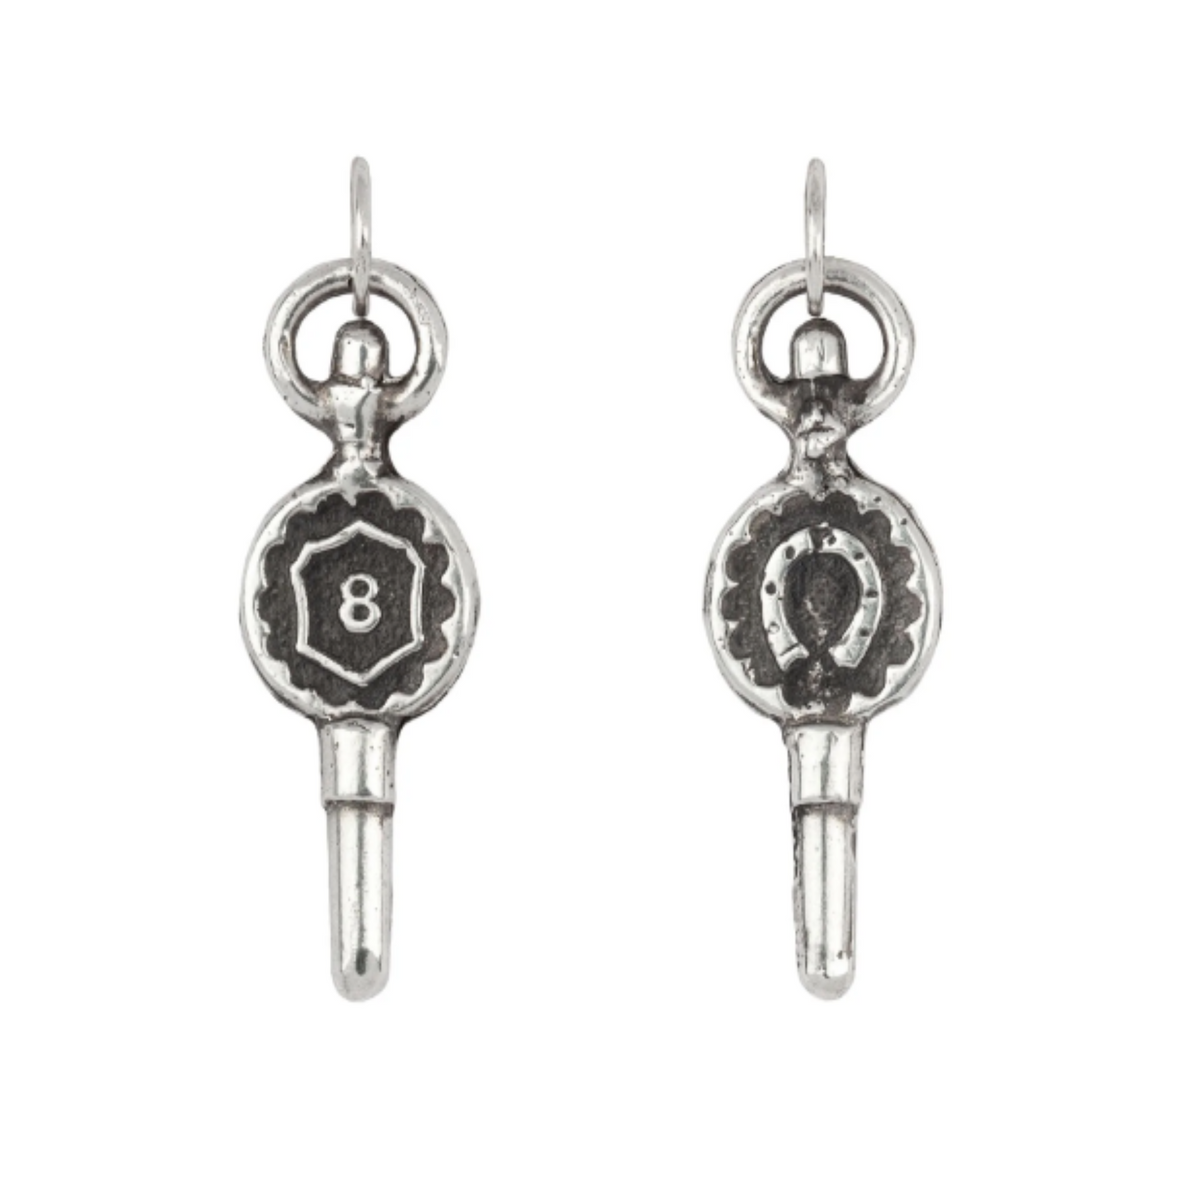 Number 8 Key Charm, Sterling Silver